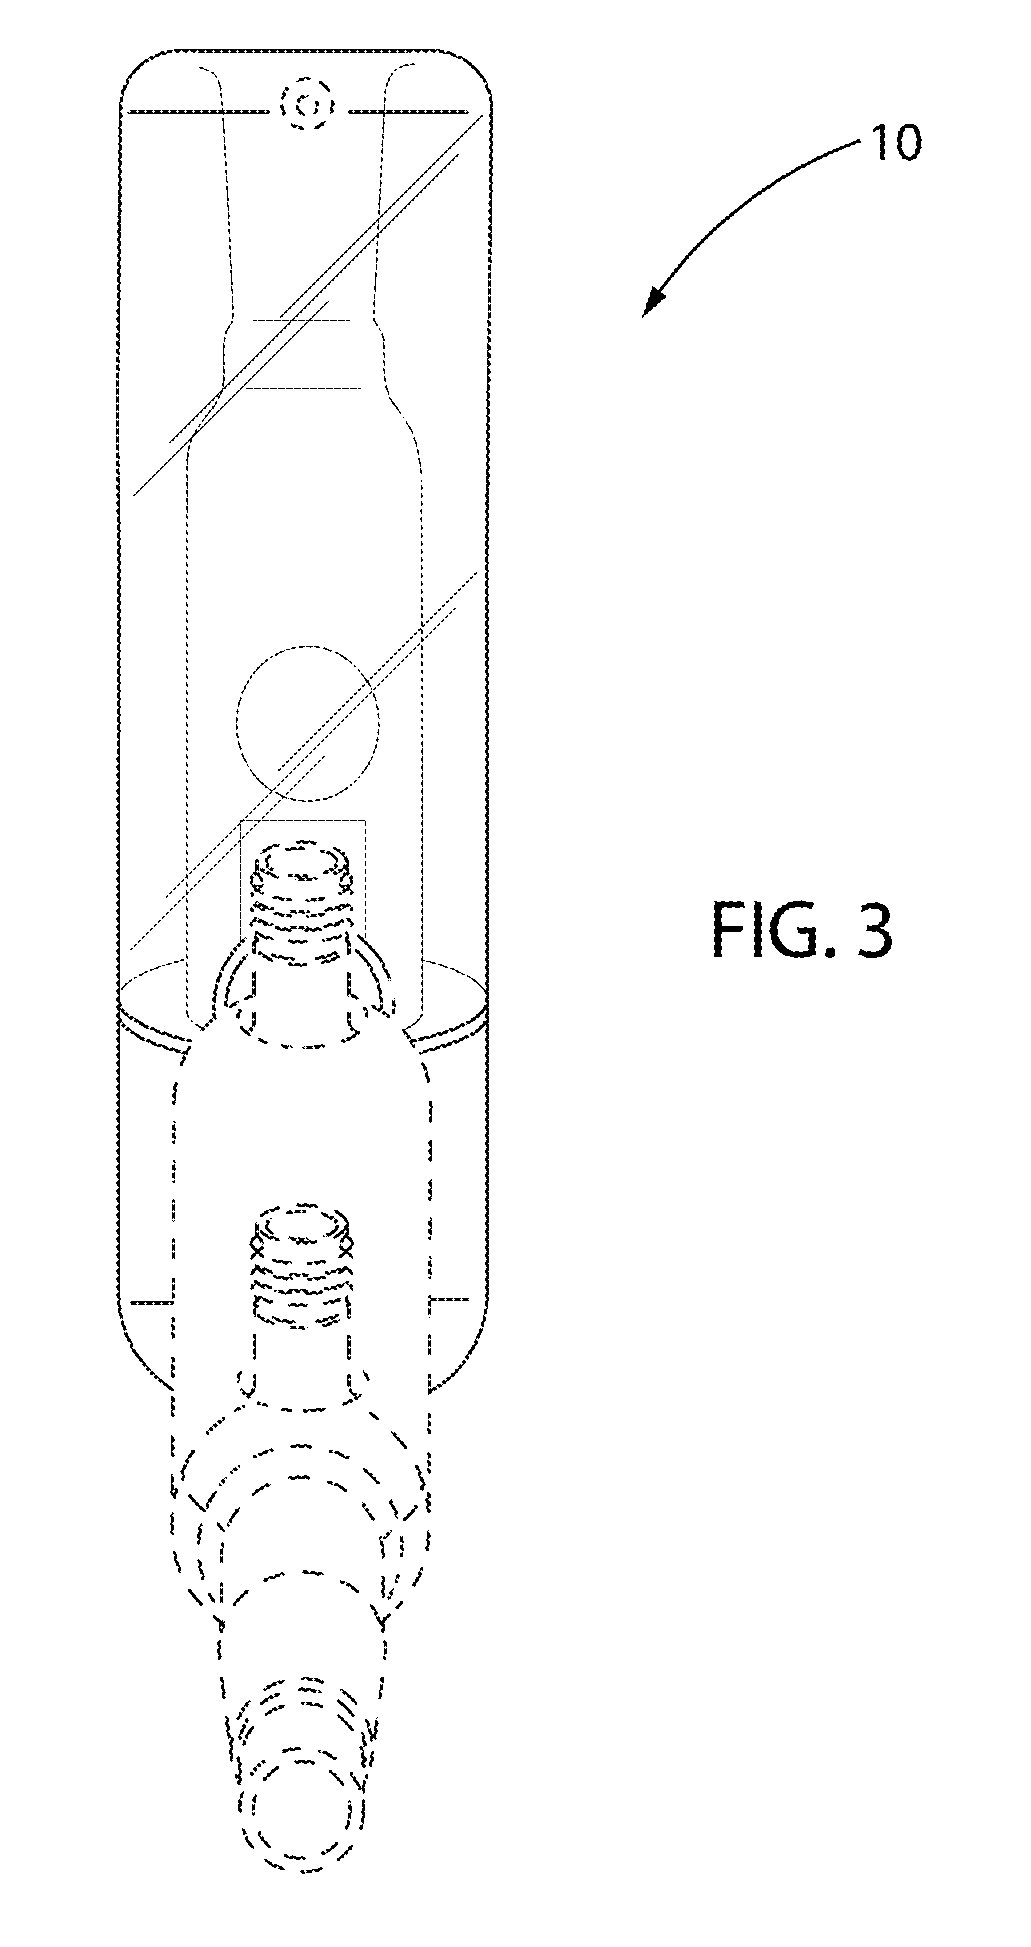 High efficiency distillation head and methods of use